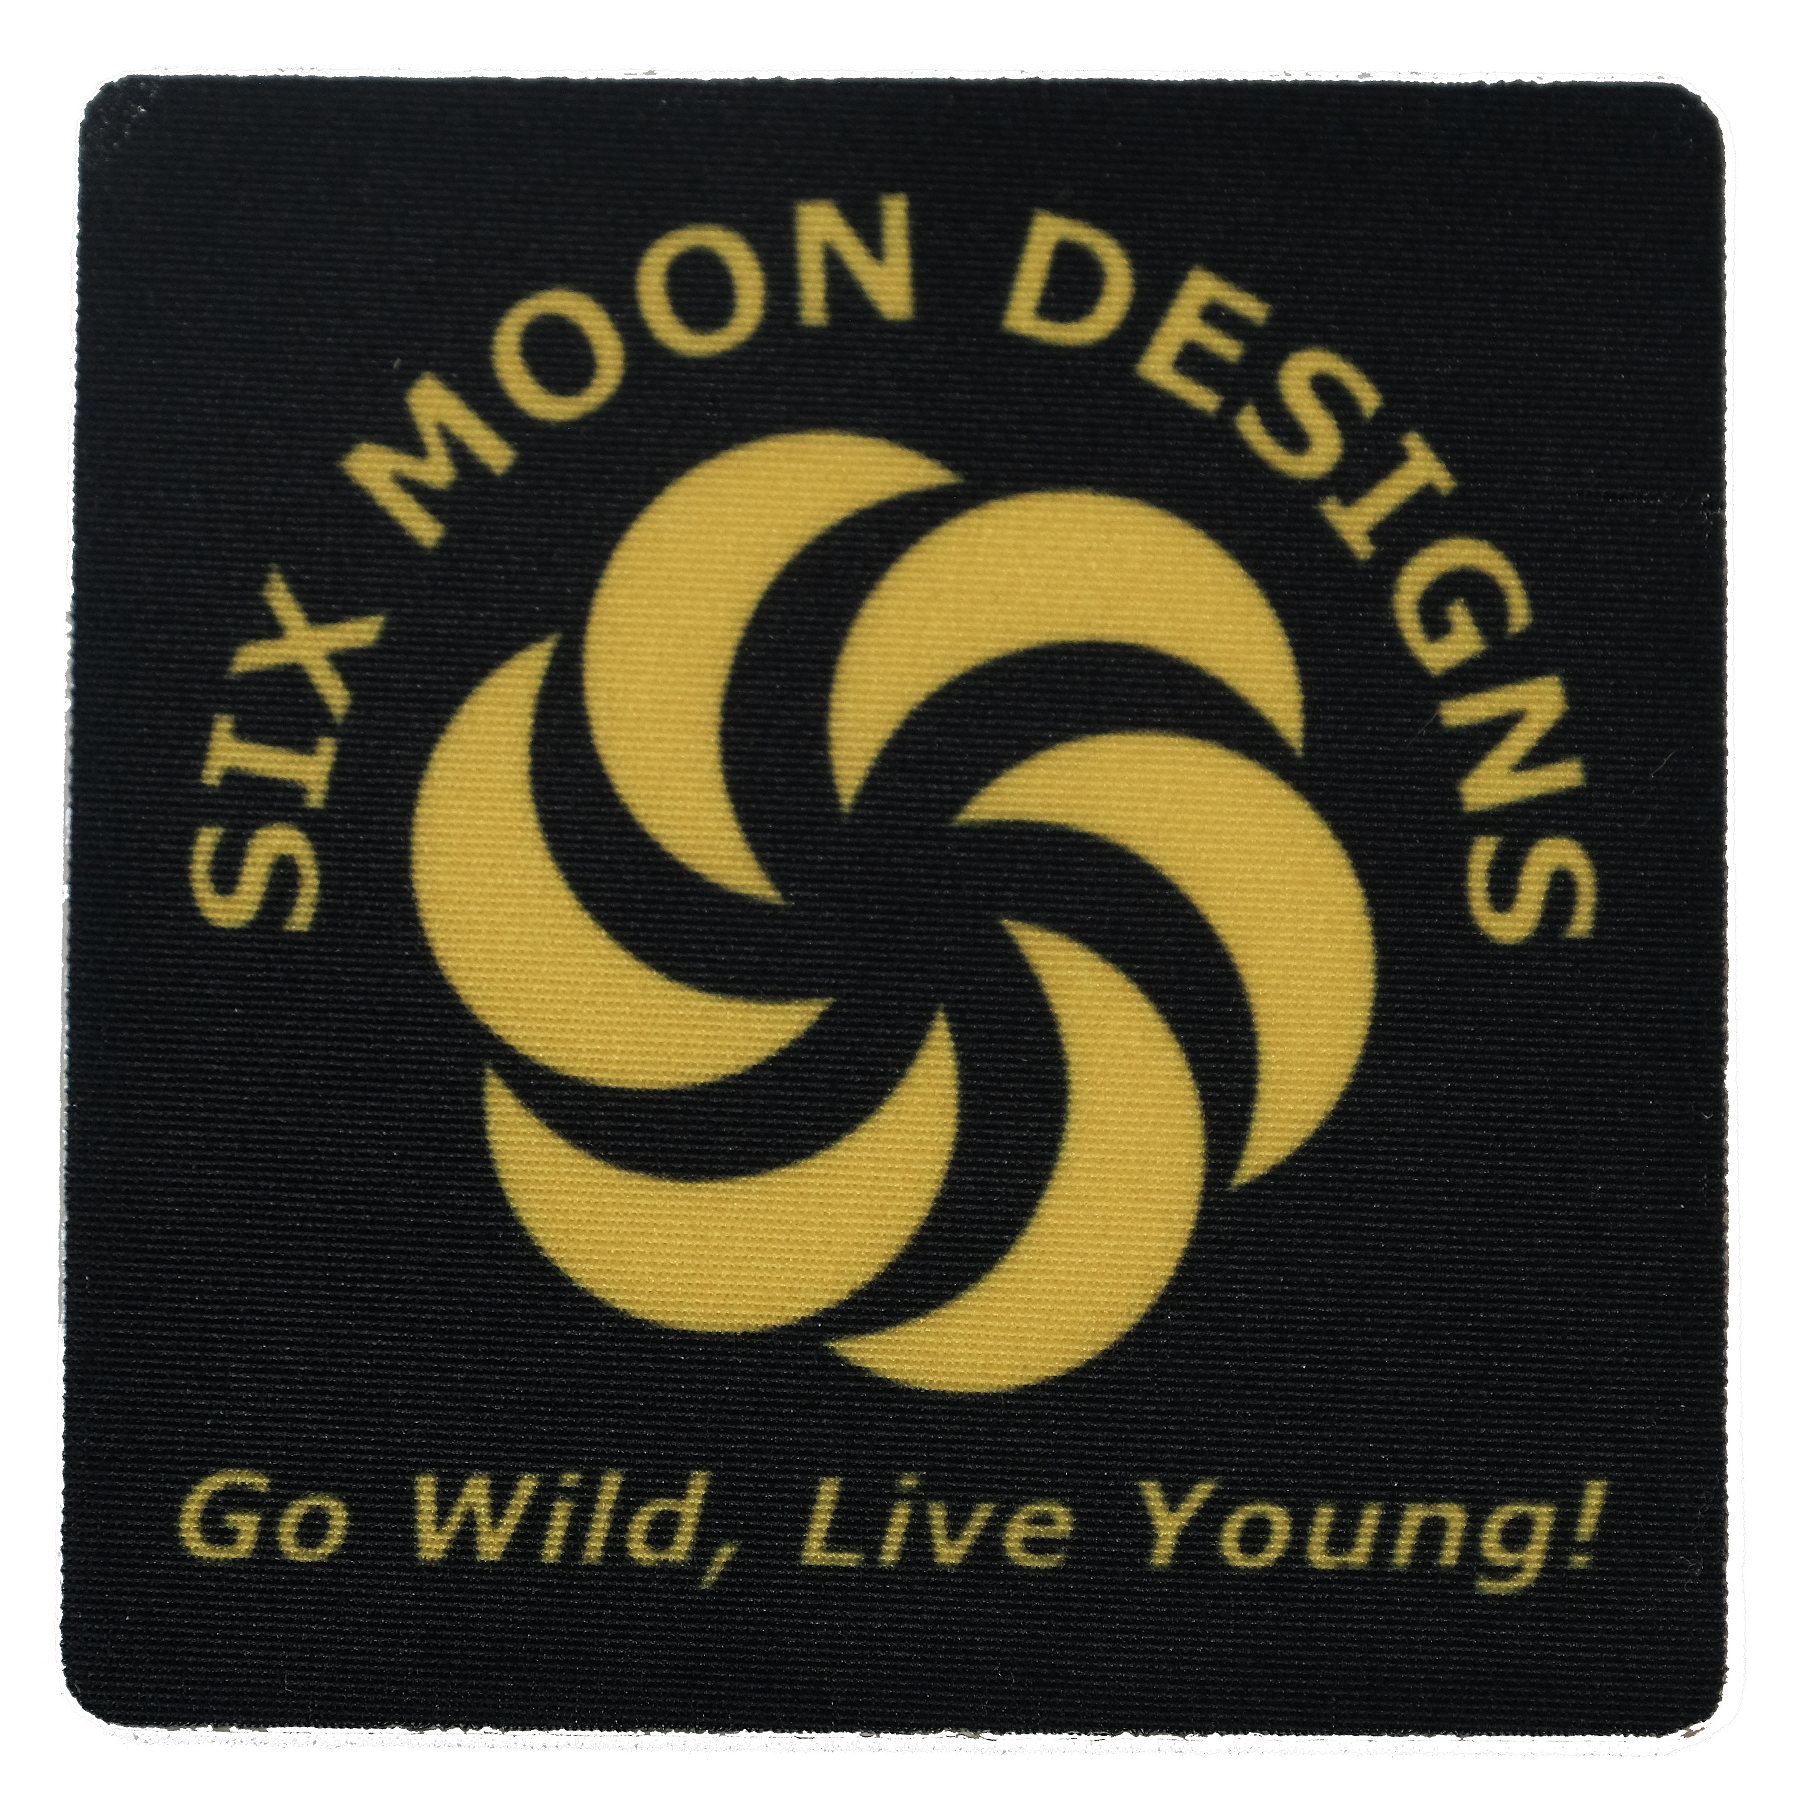 Six Moon Designs NoSo Patches